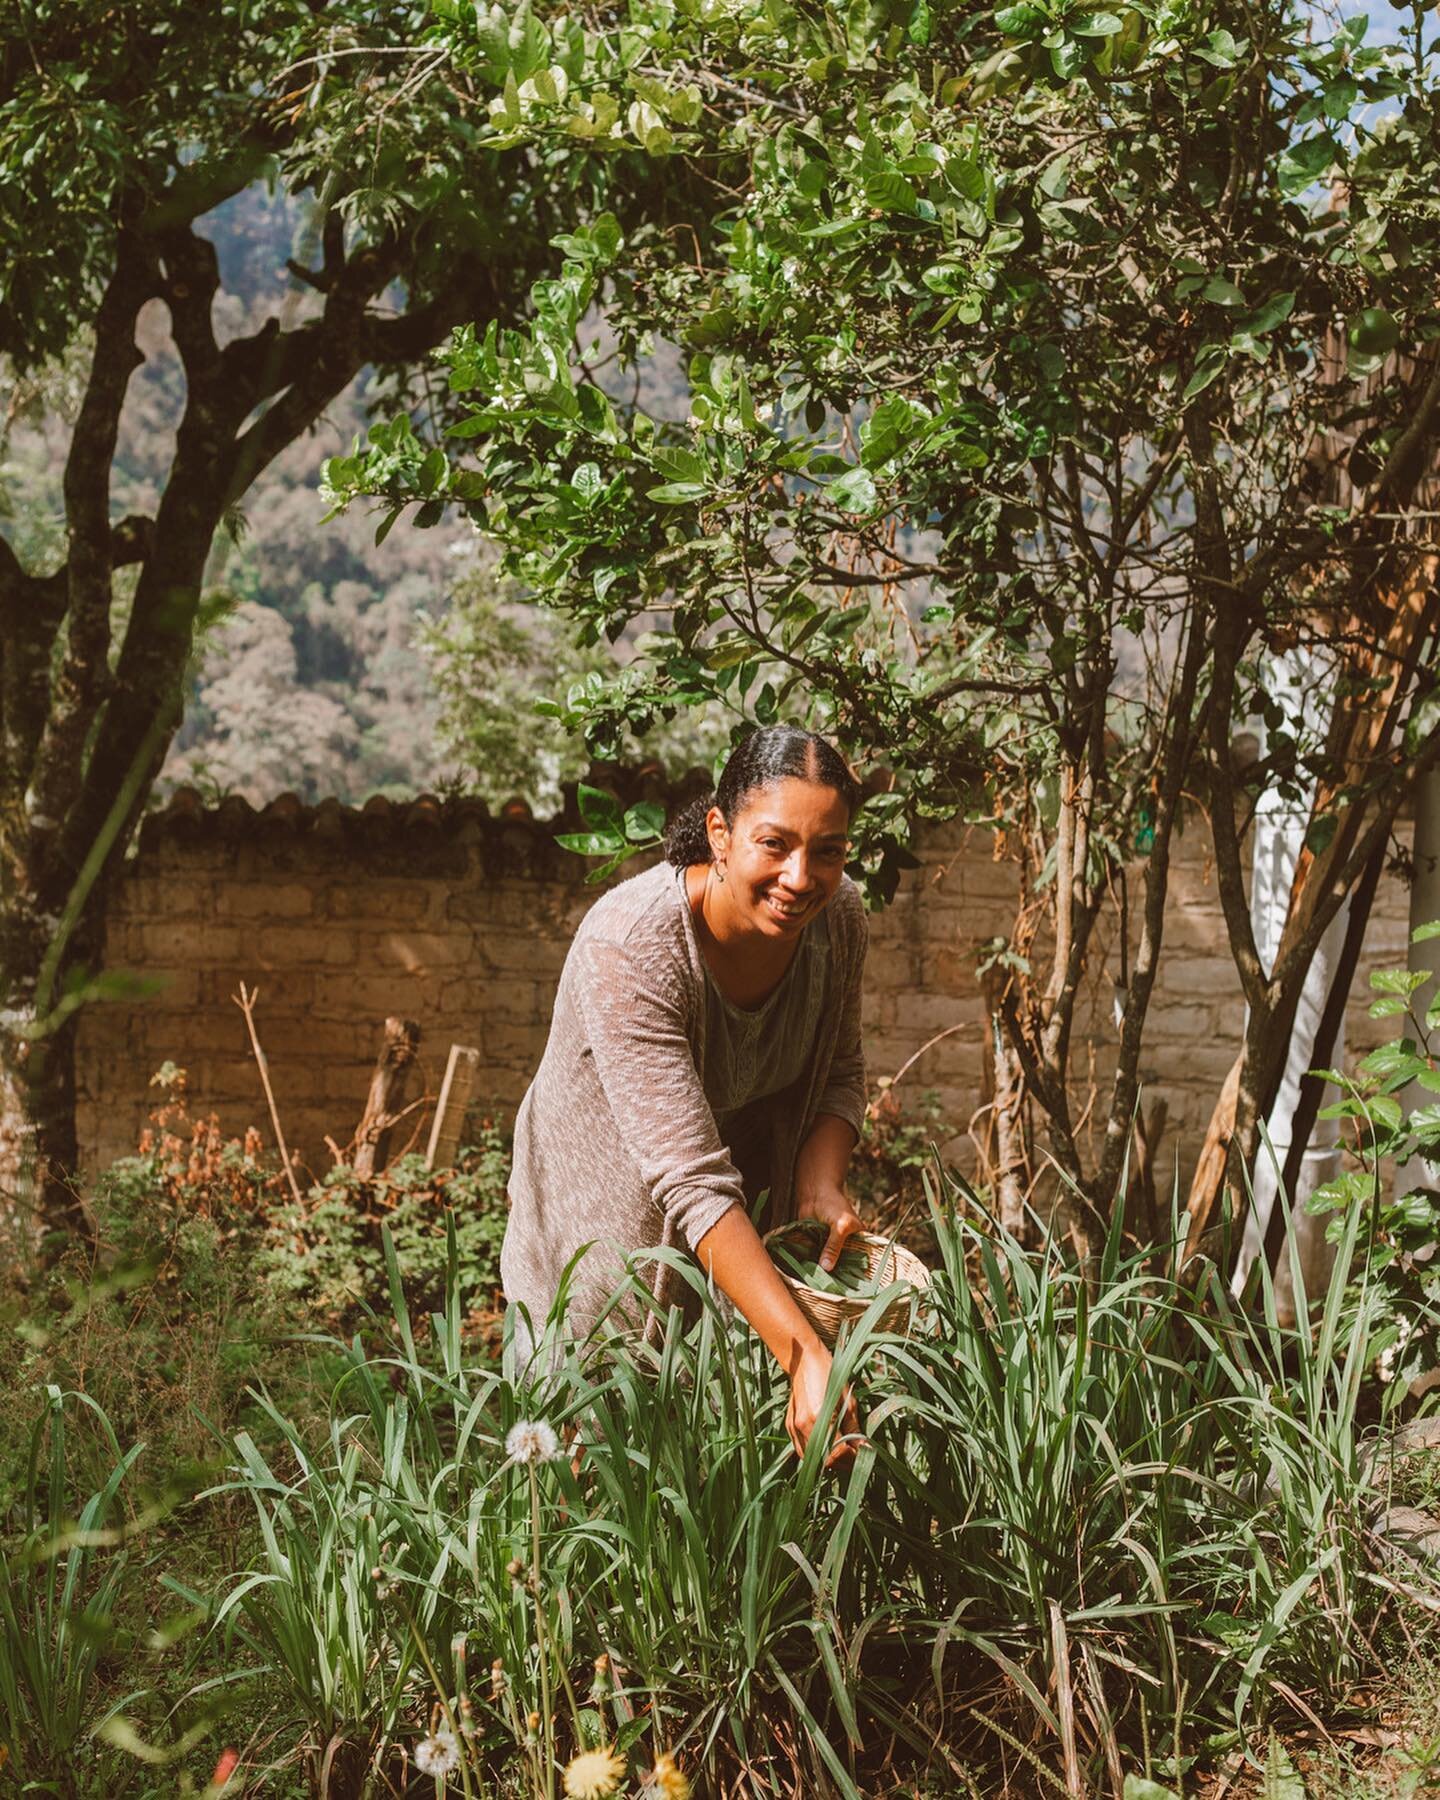 Lucy Ashman is perhaps the most &quot;down-to-earth&quot; founder there is (but she'll never admit to it). She is a vegan mother, raising her kids in a zero-waste household in the mountains of San Cristobal el Alto. She cares deeply about fostering a